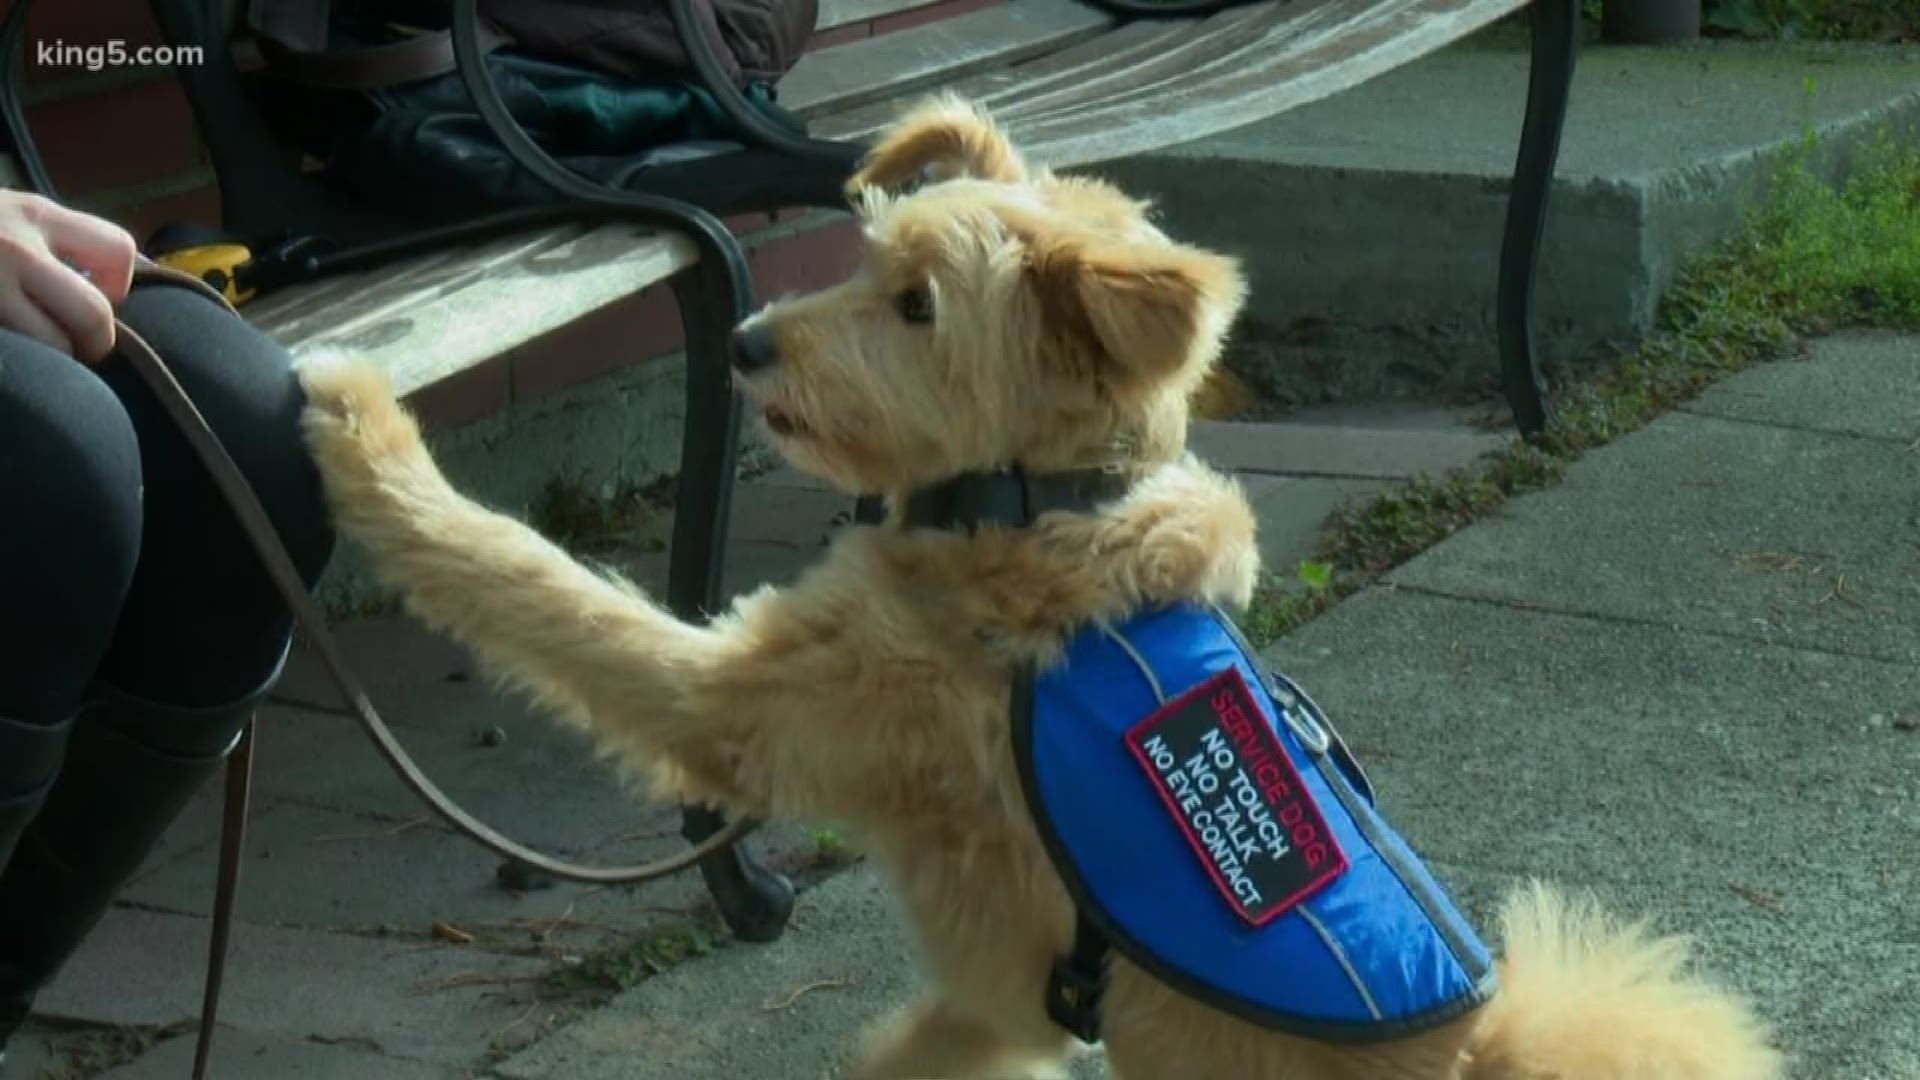 After getting questioned about her disability, a Seattle woman is spreading the word about how you should interact with service animals in public.